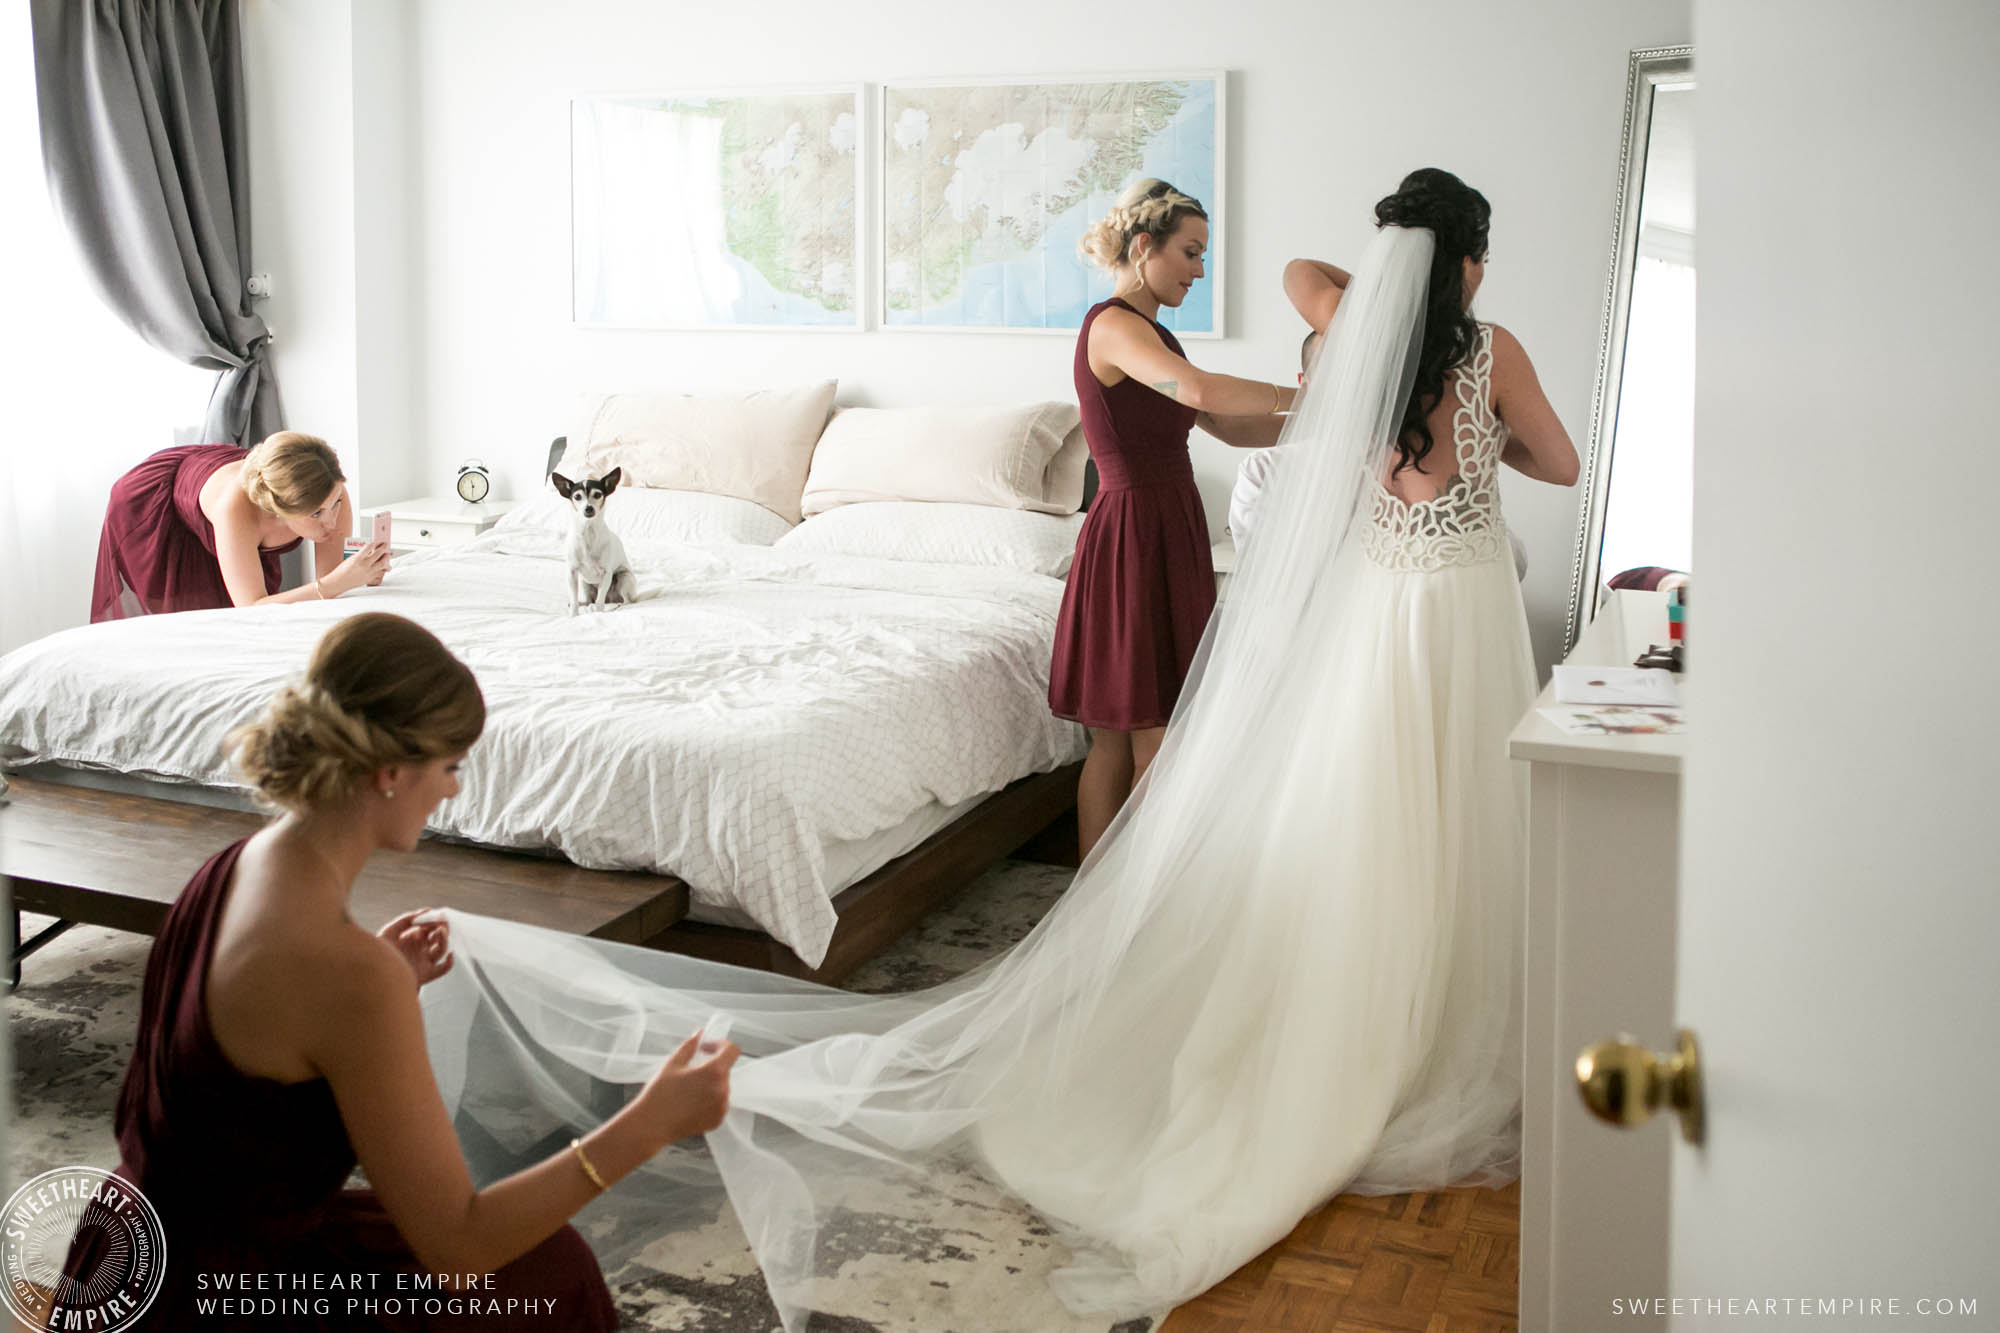 Bride and bridesmaids getting ready. 